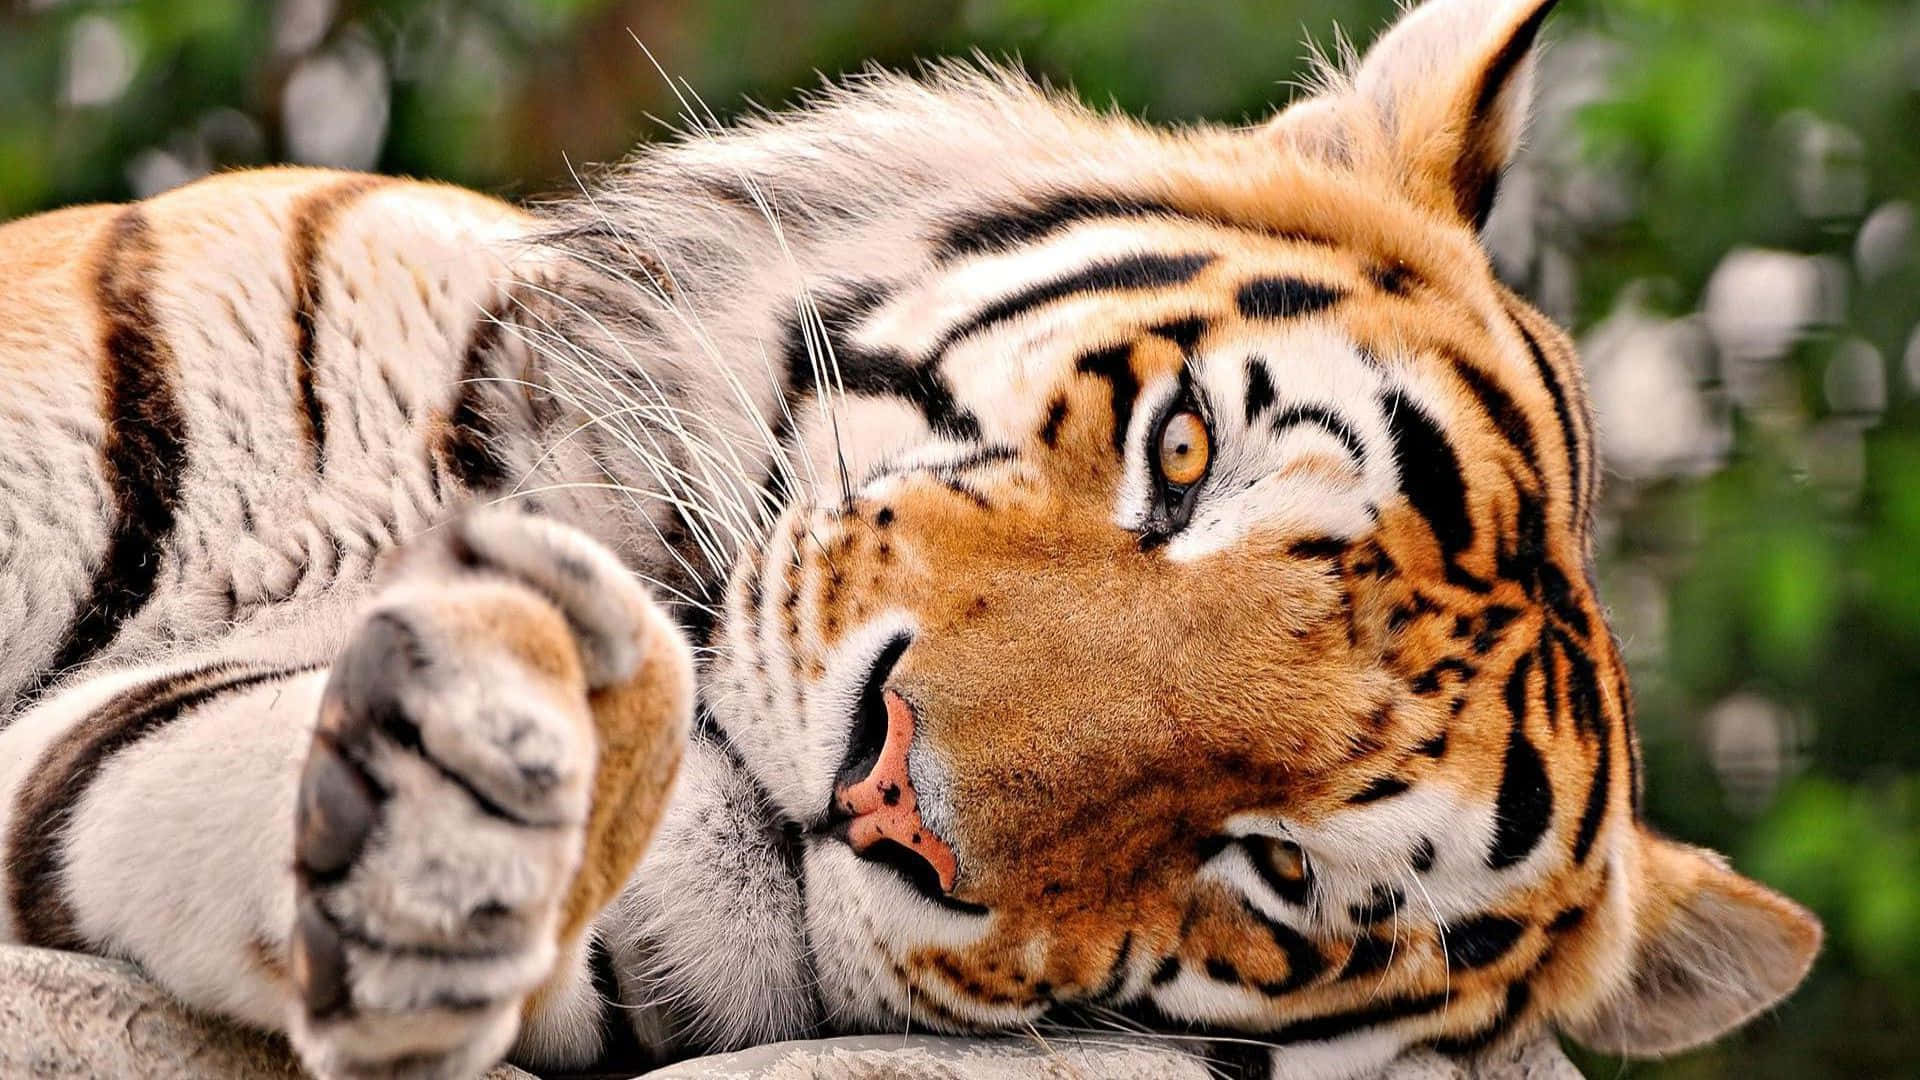 Cute Tiger Sleepy Pose Picture